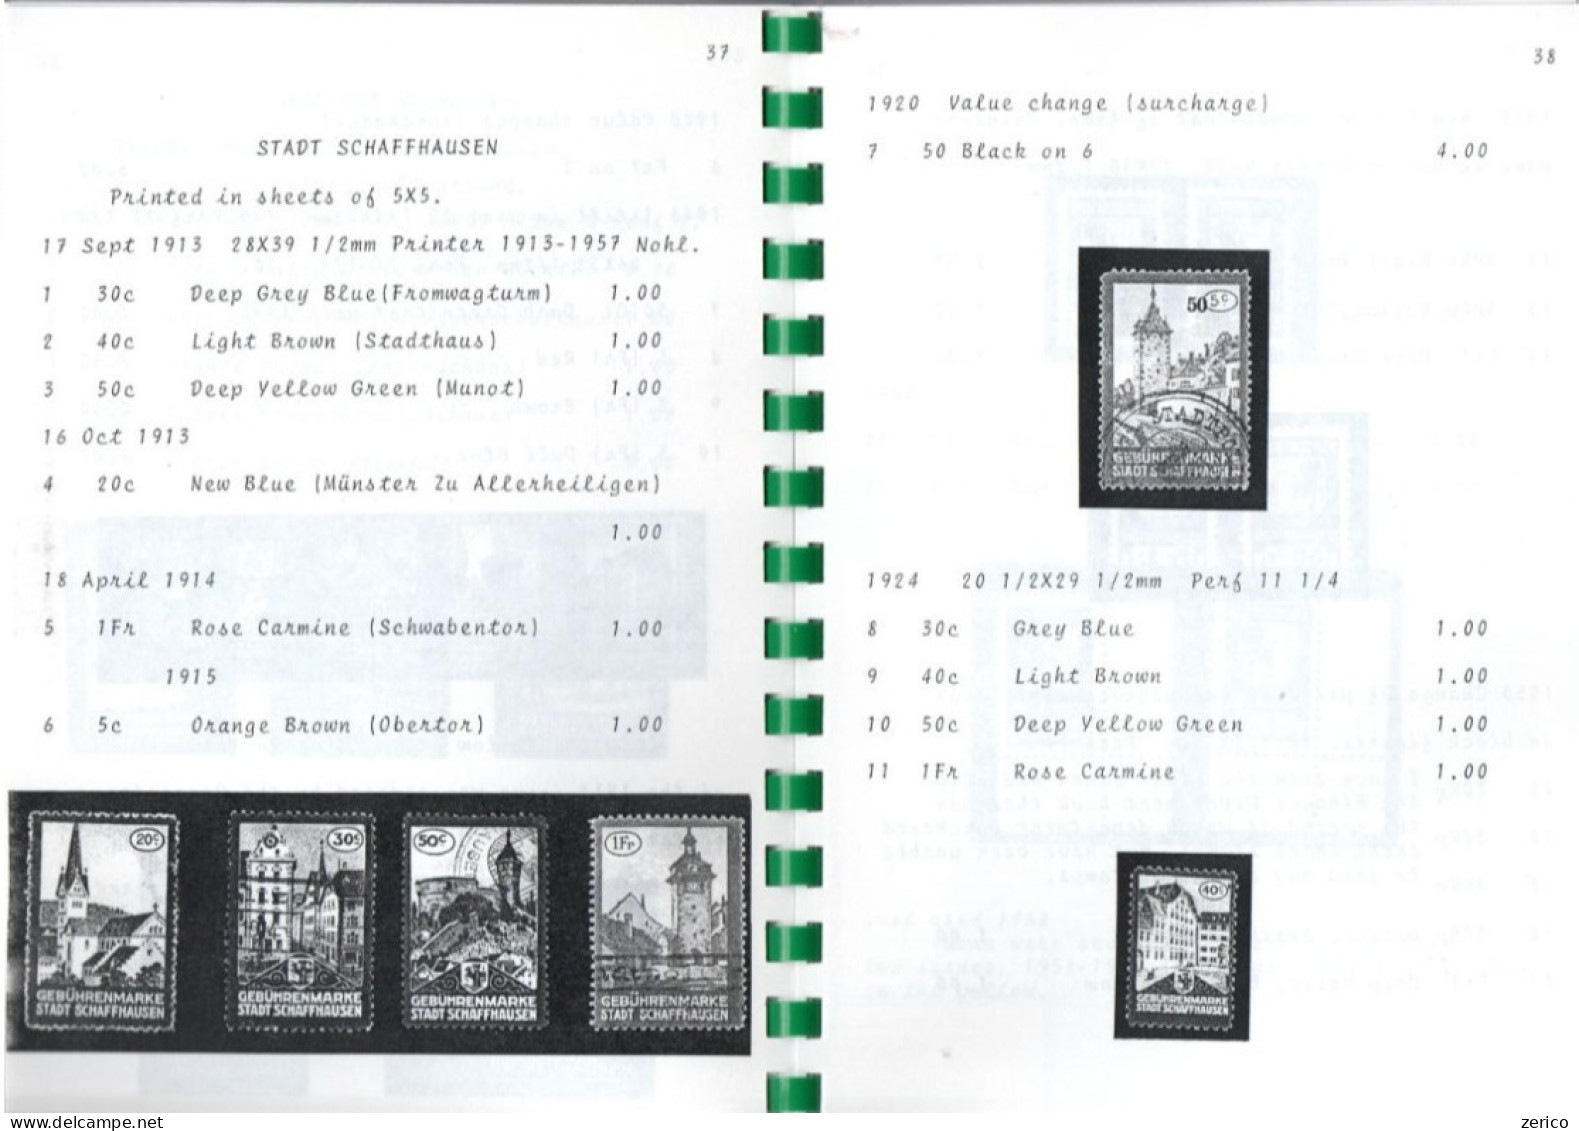 SUISSE Catalog Of The Fiscal Stamps Of The KANTONE And GEMEINDEN Of Switzerland, By Gene Kellys, édi 1986 USA 118 Pages - Revenue Stamps